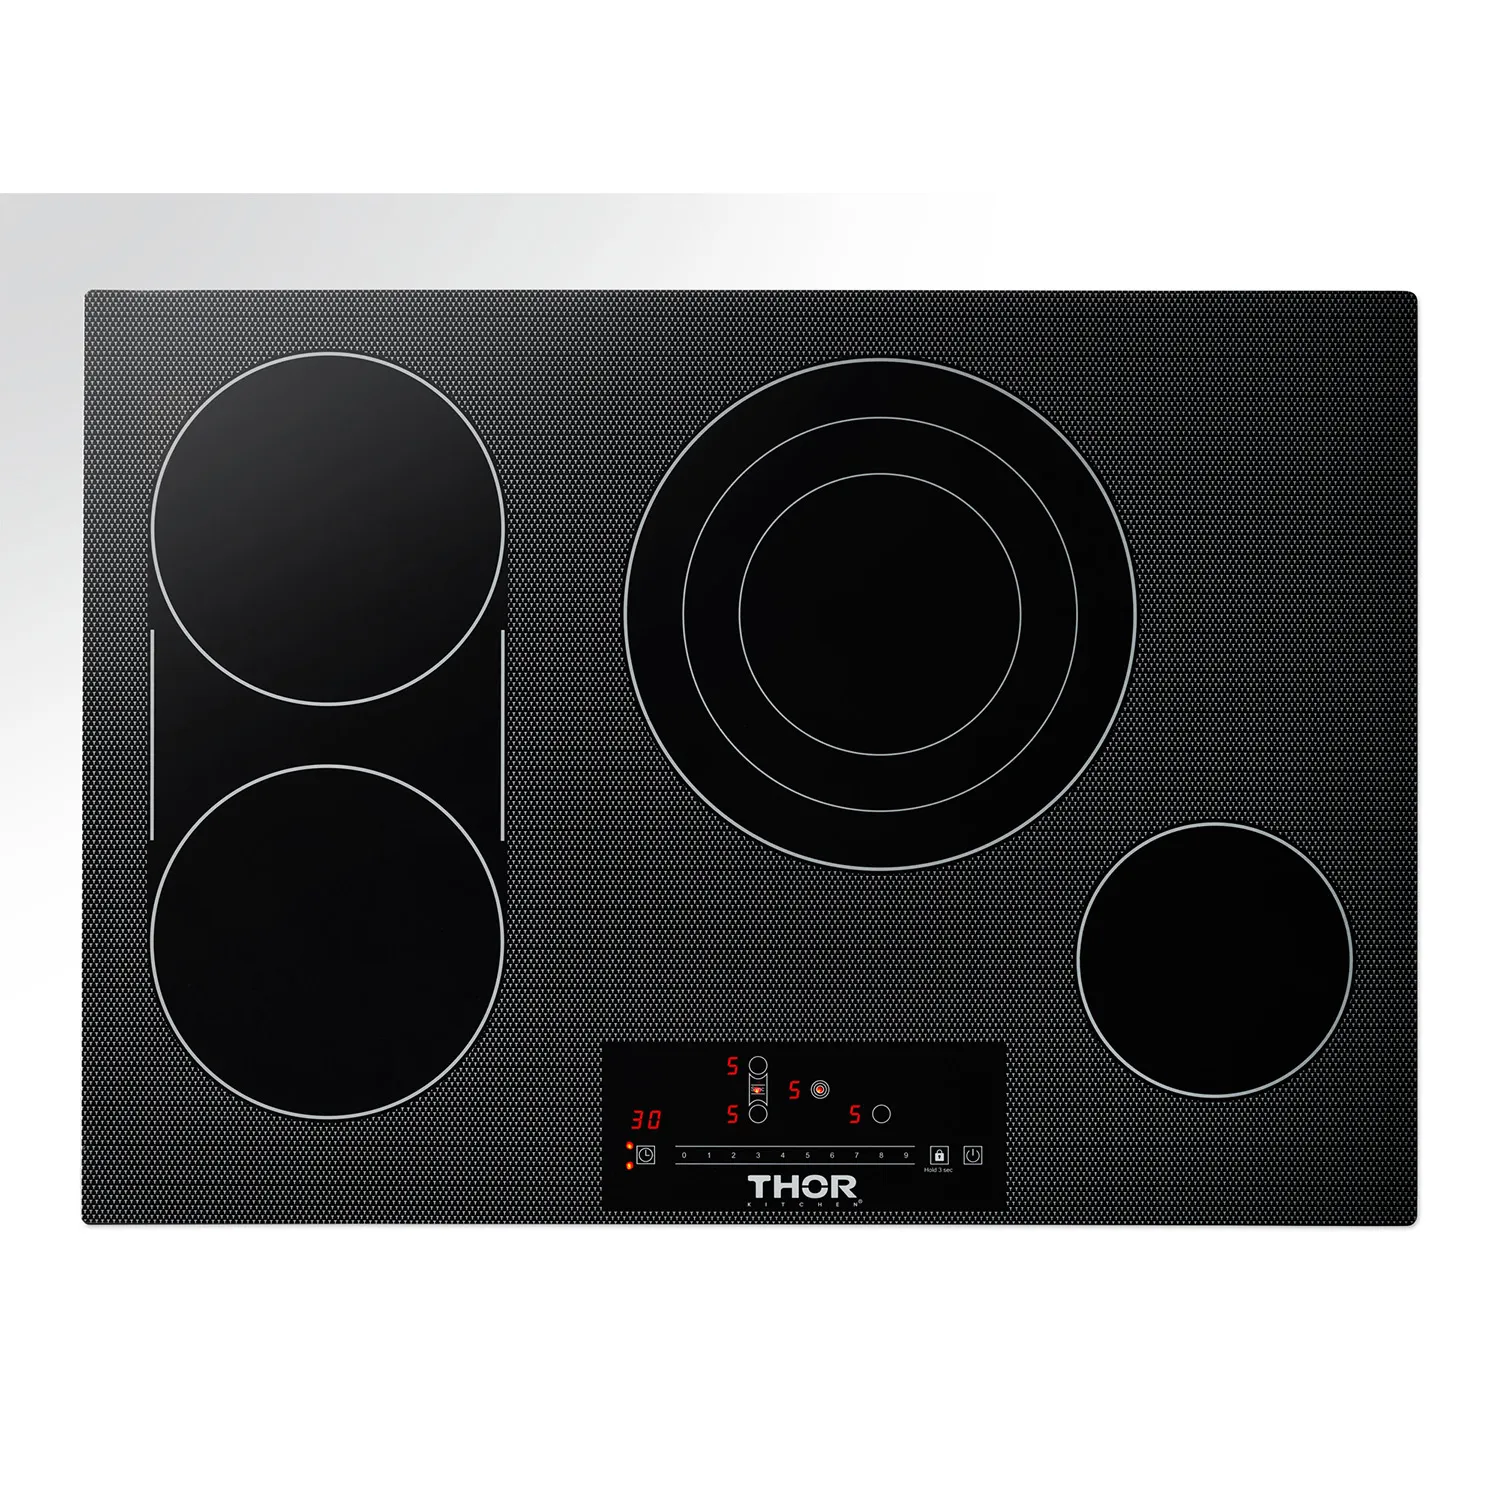 THOR 30" ELECTRIC COOKTOP